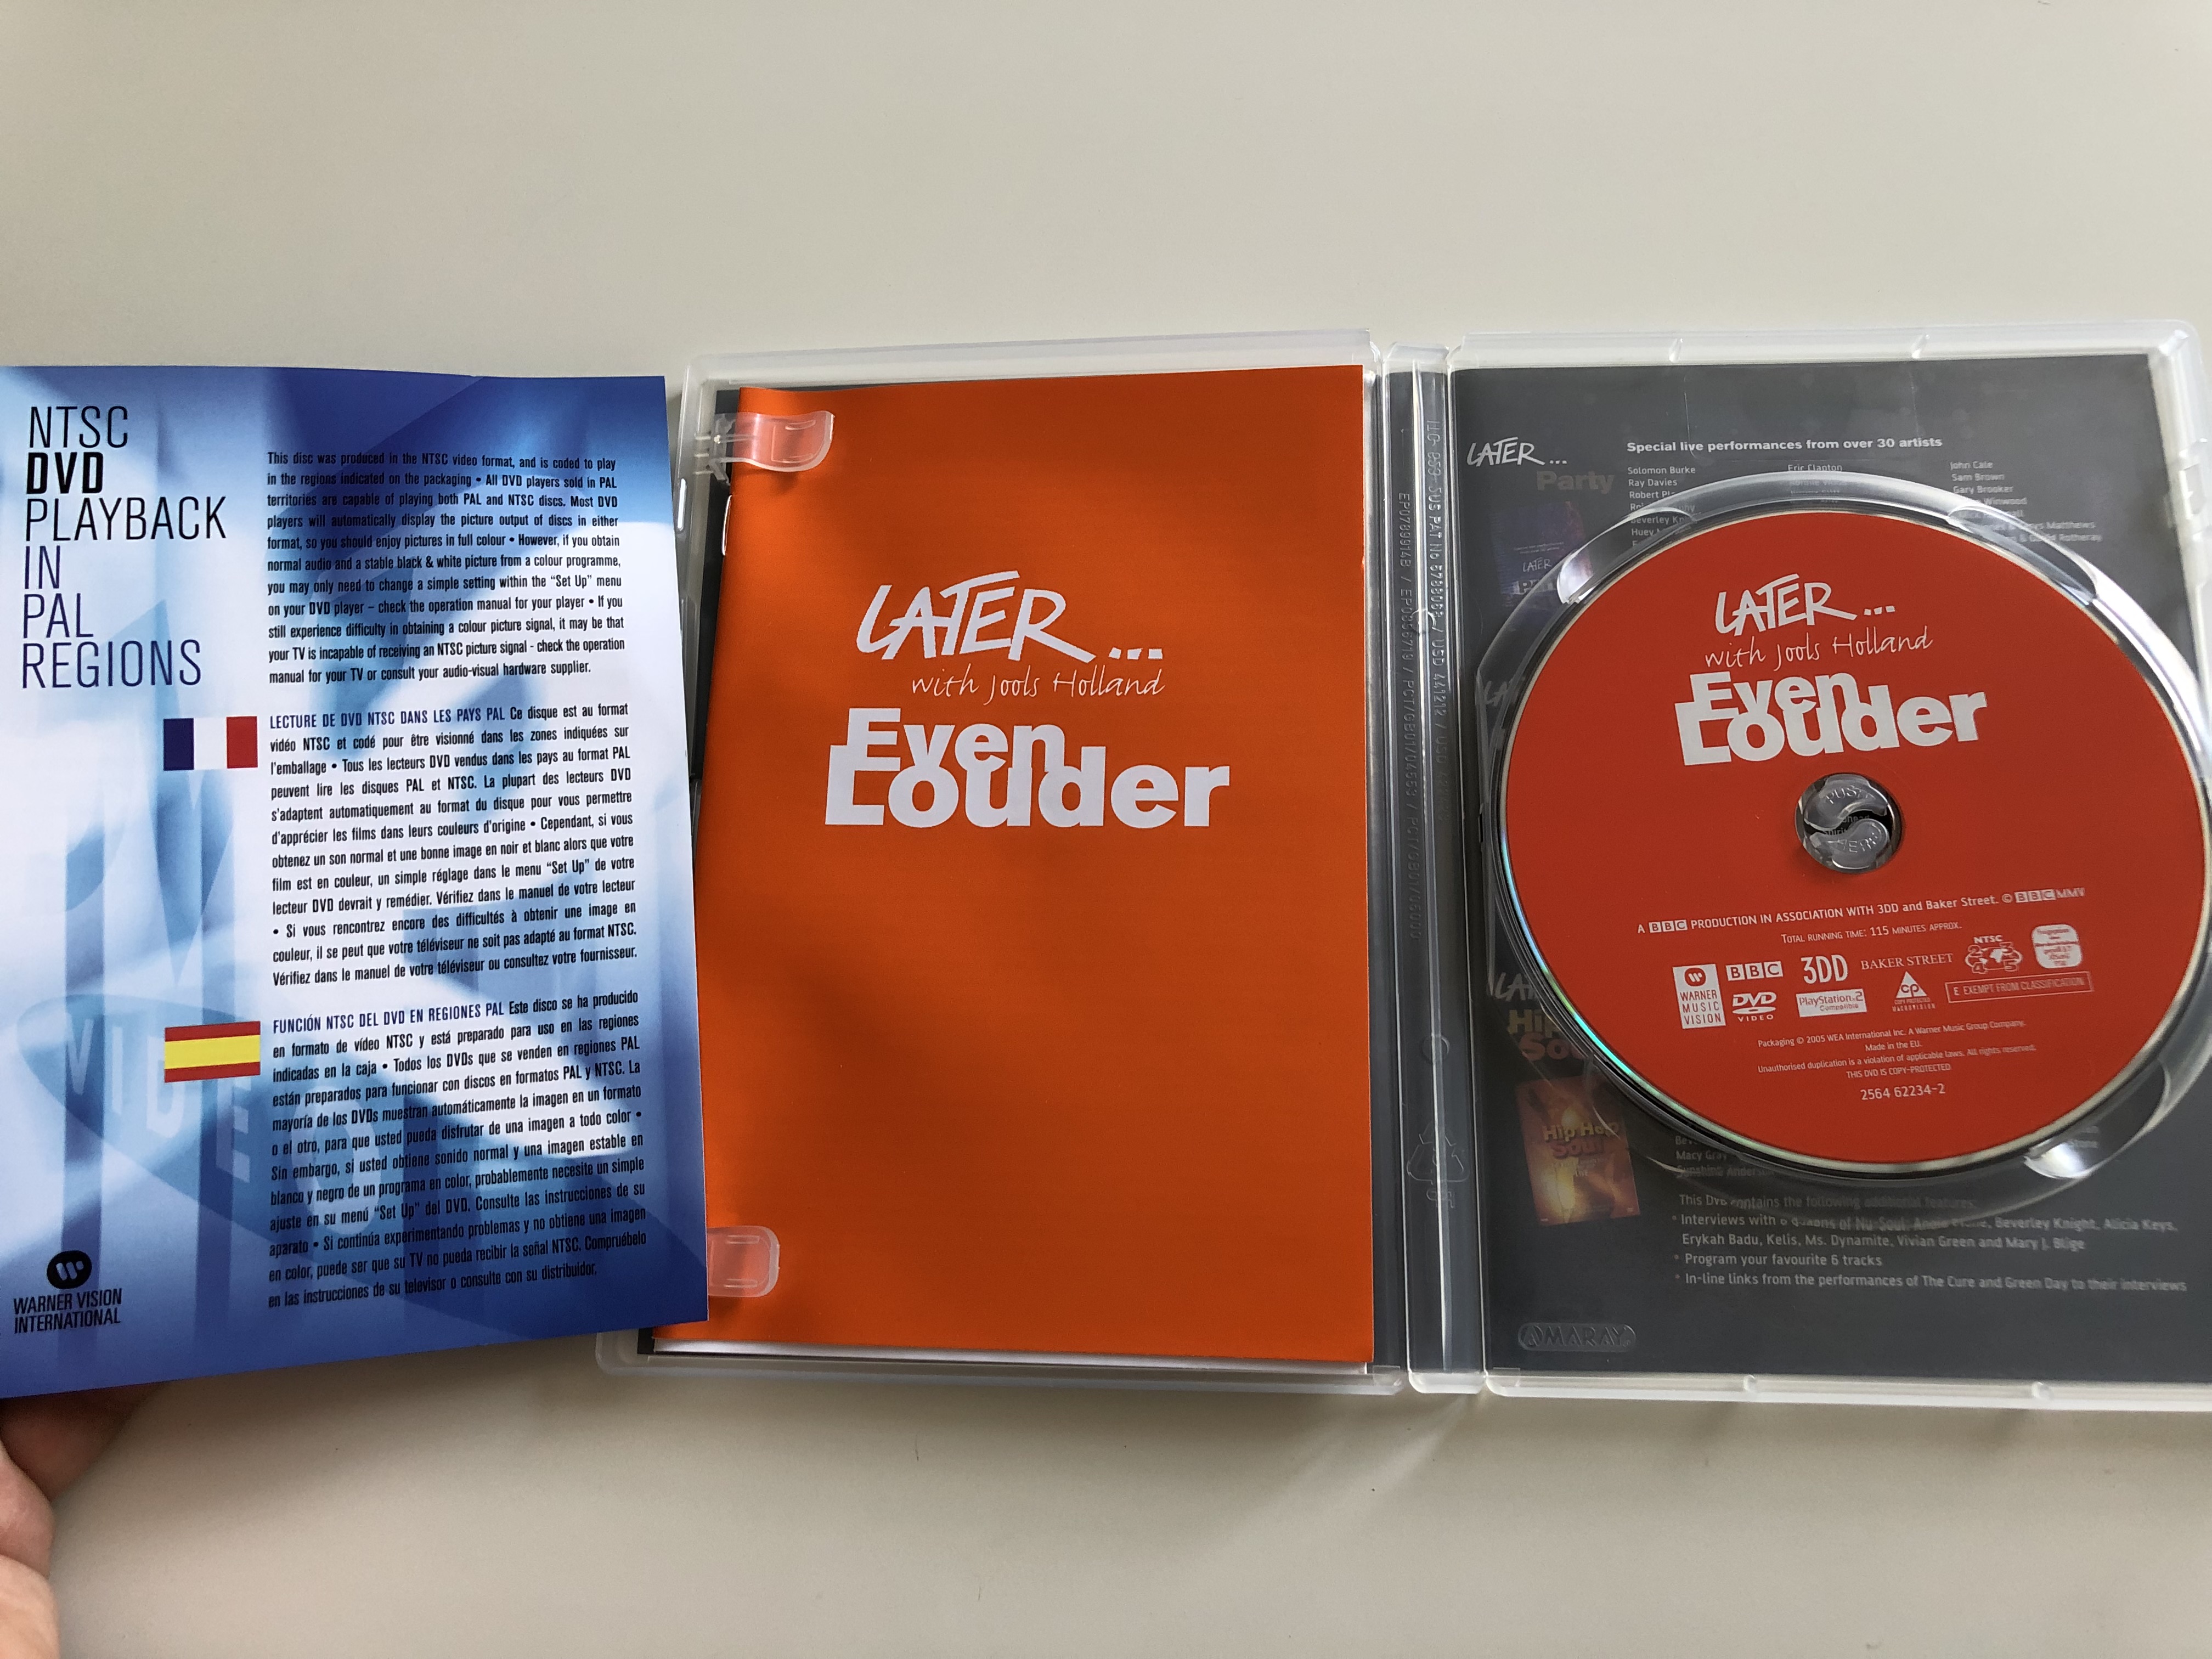 later...-with-jools-holland-even-louder-dvd-2005-green-day-muse-the-hives-the-cure-the-killers-kings-of-leon-nick-cave-the-bad-seeds-bbc-2-.jpg